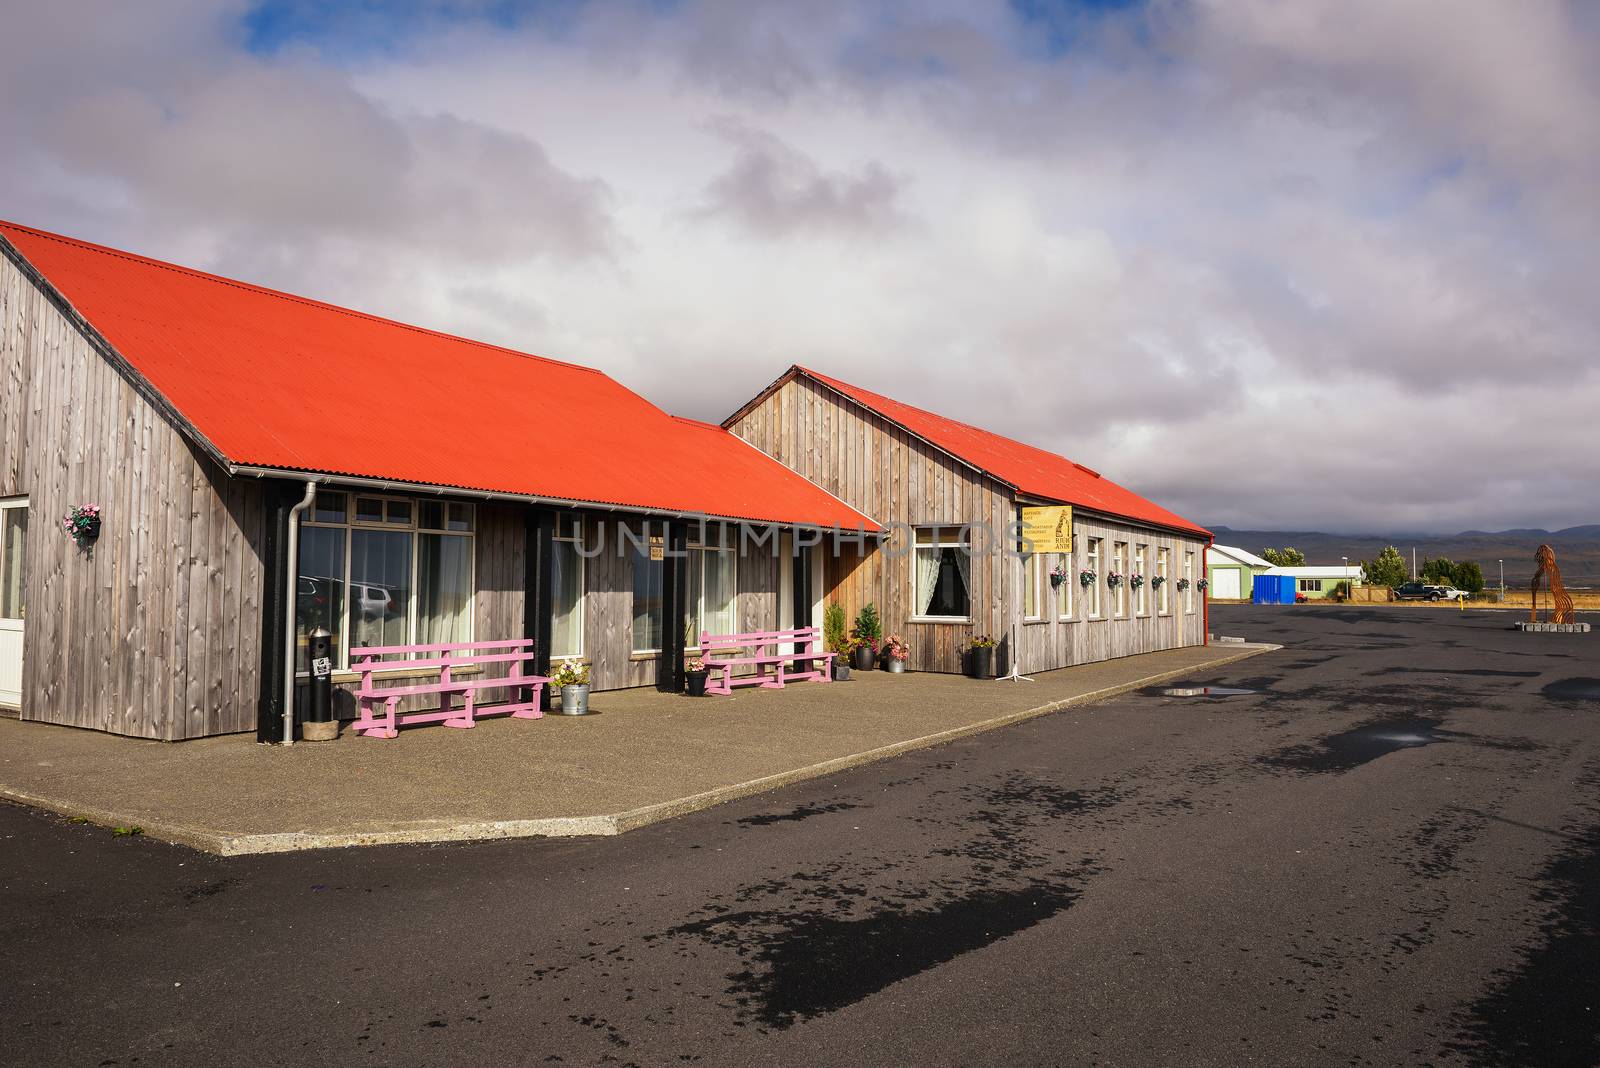 Vegamot, Iceland - September 8, 2019 : Hotel Rjukandi located on the Snaefellsnes peninsula in west Iceland offering an in-house restaurant and rooms with mountain views.